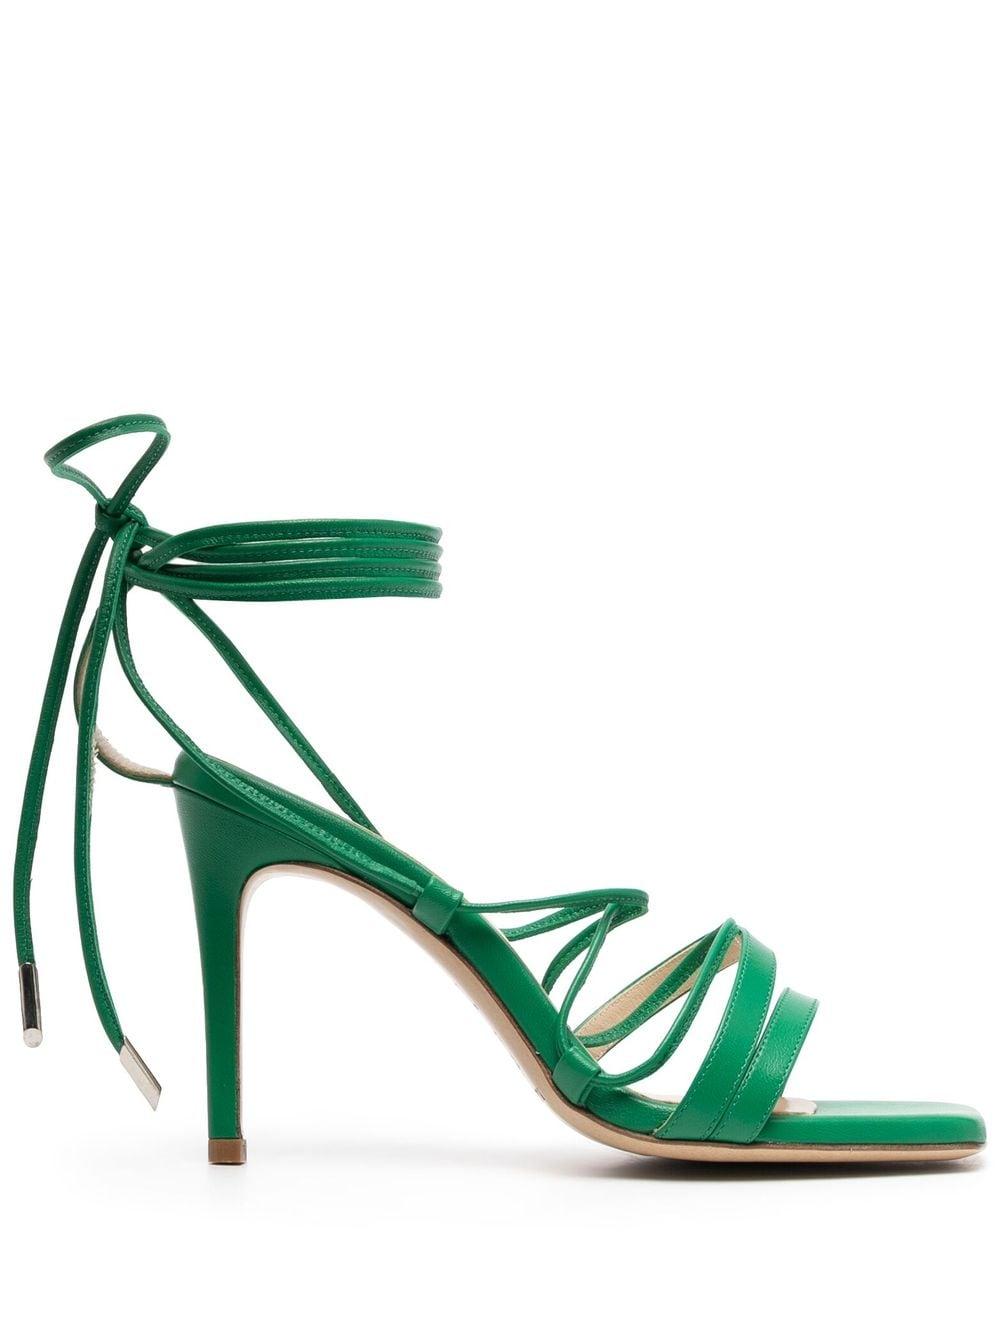 P.A.R.O.S.H. Leather Ankle-tie Sandals in Green | Lyst